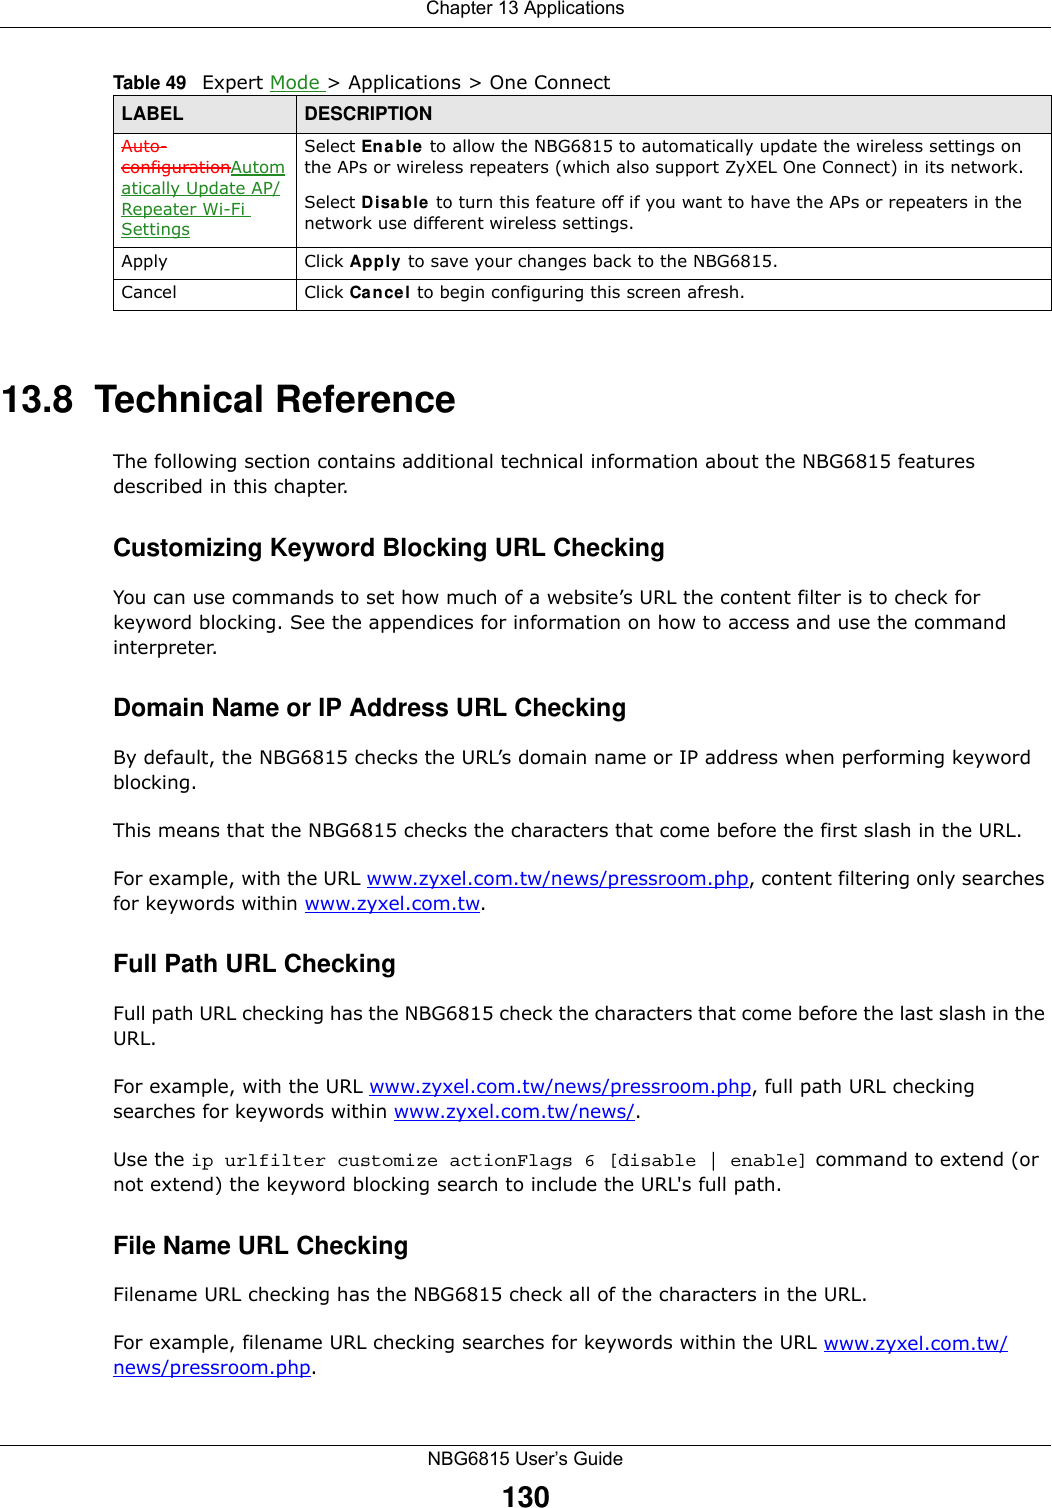 Chapter 13 ApplicationsNBG6815 User’s Guide13013.8  Technical ReferenceThe following section contains additional technical information about the NBG6815 features described in this chapter.Customizing Keyword Blocking URL CheckingYou can use commands to set how much of a website’s URL the content filter is to check for keyword blocking. See the appendices for information on how to access and use the command interpreter.Domain Name or IP Address URL CheckingBy default, the NBG6815 checks the URL’s domain name or IP address when performing keyword blocking.This means that the NBG6815 checks the characters that come before the first slash in the URL.For example, with the URL www.zyxel.com.tw/news/pressroom.php, content filtering only searches for keywords within www.zyxel.com.tw.Full Path URL CheckingFull path URL checking has the NBG6815 check the characters that come before the last slash in the URL.For example, with the URL www.zyxel.com.tw/news/pressroom.php, full path URL checking searches for keywords within www.zyxel.com.tw/news/.Use the ip urlfilter customize actionFlags 6 [disable | enable] command to extend (or not extend) the keyword blocking search to include the URL&apos;s full path.File Name URL CheckingFilename URL checking has the NBG6815 check all of the characters in the URL.For example, filename URL checking searches for keywords within the URL www.zyxel.com.tw/news/pressroom.php.Auto-configurationAutomatically Update AP/Repeater Wi-Fi SettingsSelect Enable to allow the NBG6815 to automatically update the wireless settings on the APs or wireless repeaters (which also support ZyXEL One Connect) in its network. Select Disable to turn this feature off if you want to have the APs or repeaters in the network use different wireless settings.Apply Click Apply to save your changes back to the NBG6815.Cancel Click Cancel to begin configuring this screen afresh.Table 49   Expert Mode &gt; Applications &gt; One Connect LABEL DESCRIPTION